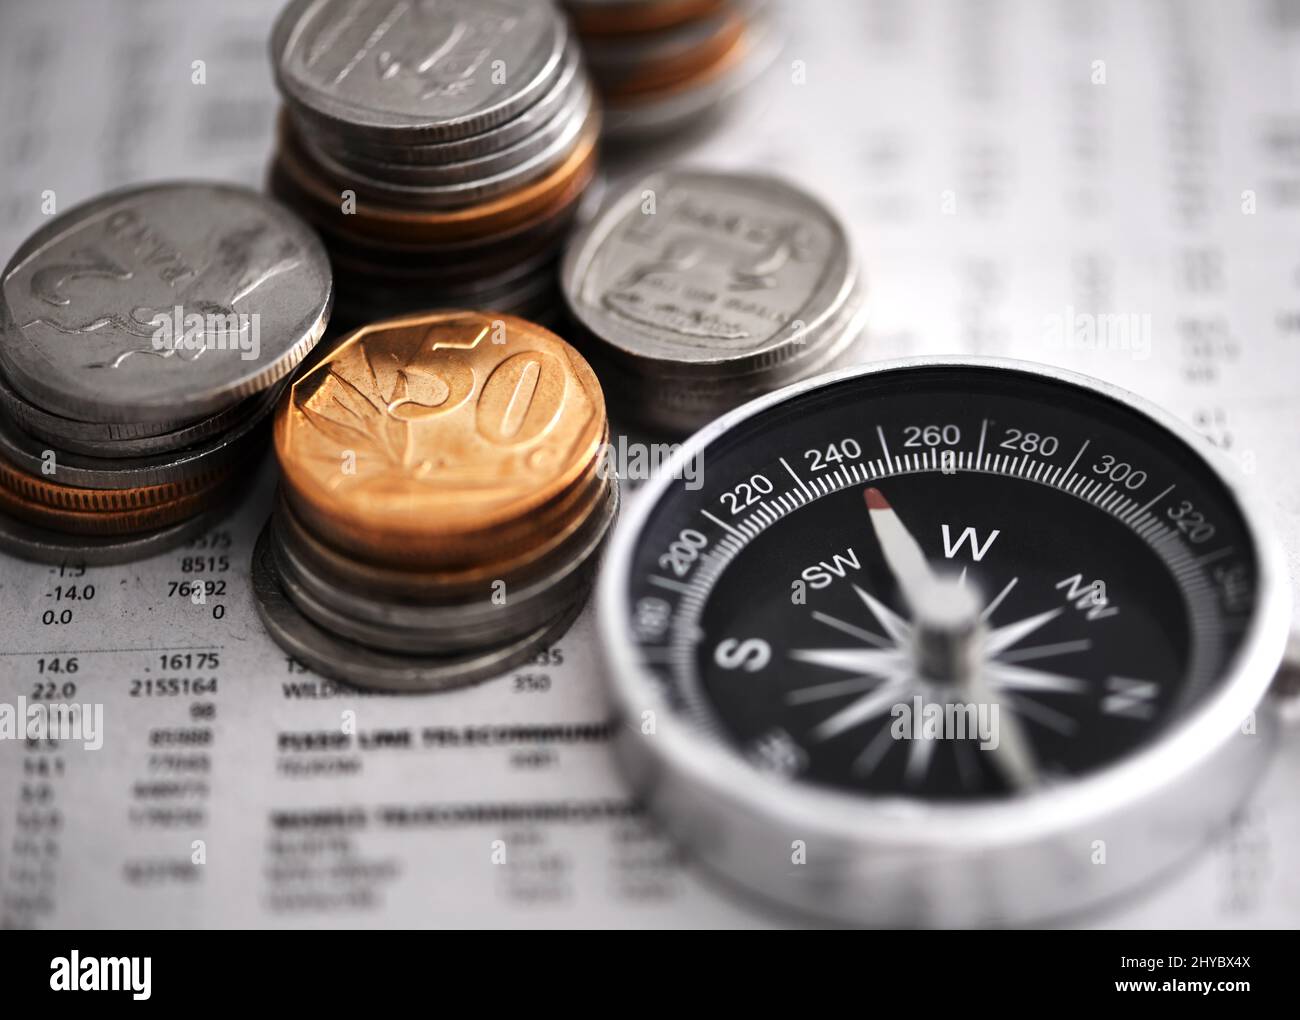 Leading the way to financial success. Studio shot of coins and a compass on some documents. Stock Photo